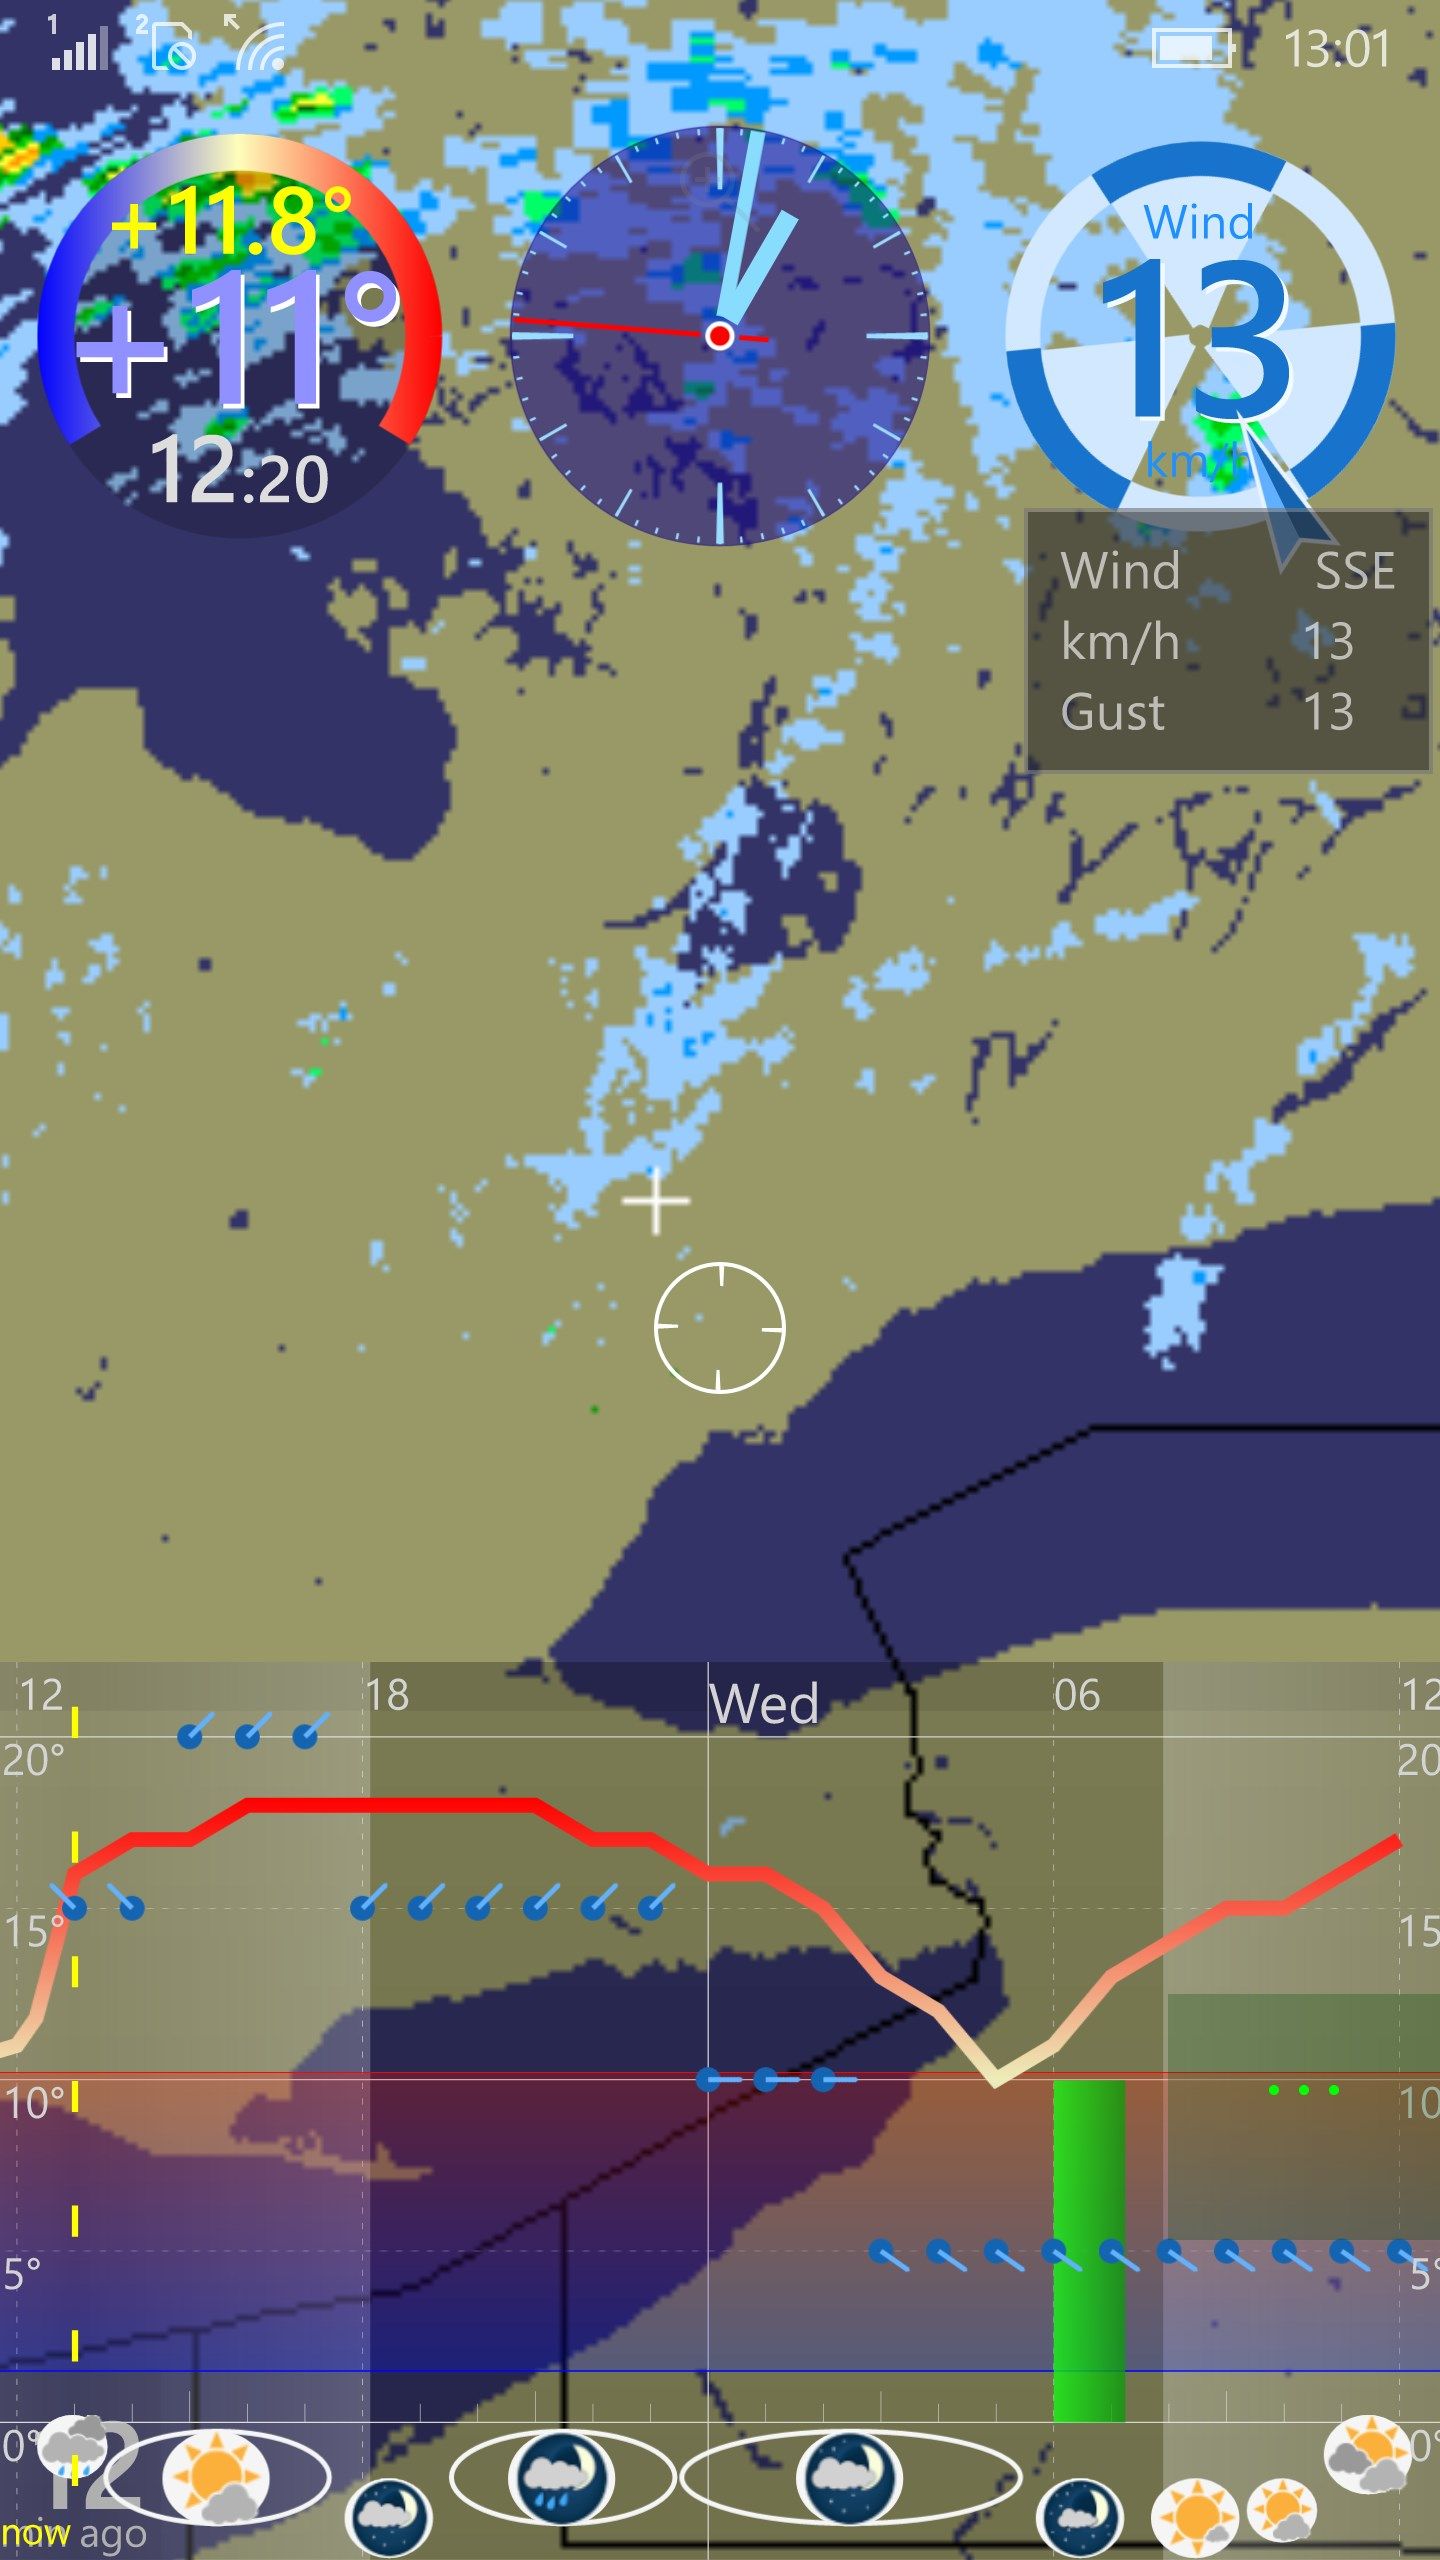 Vertical view shows animated precipitation movements